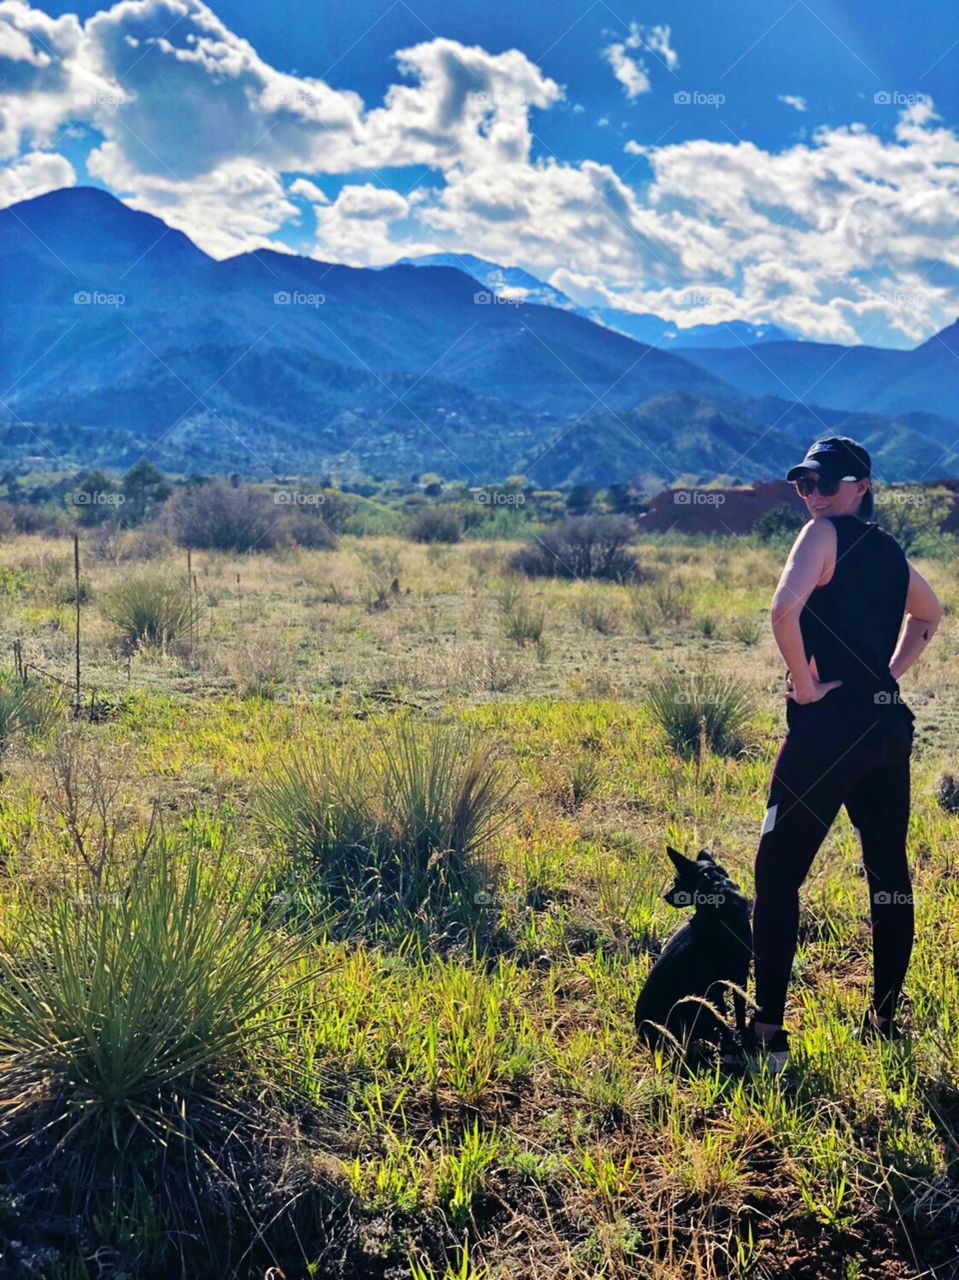 The dog and I in the Rockies 